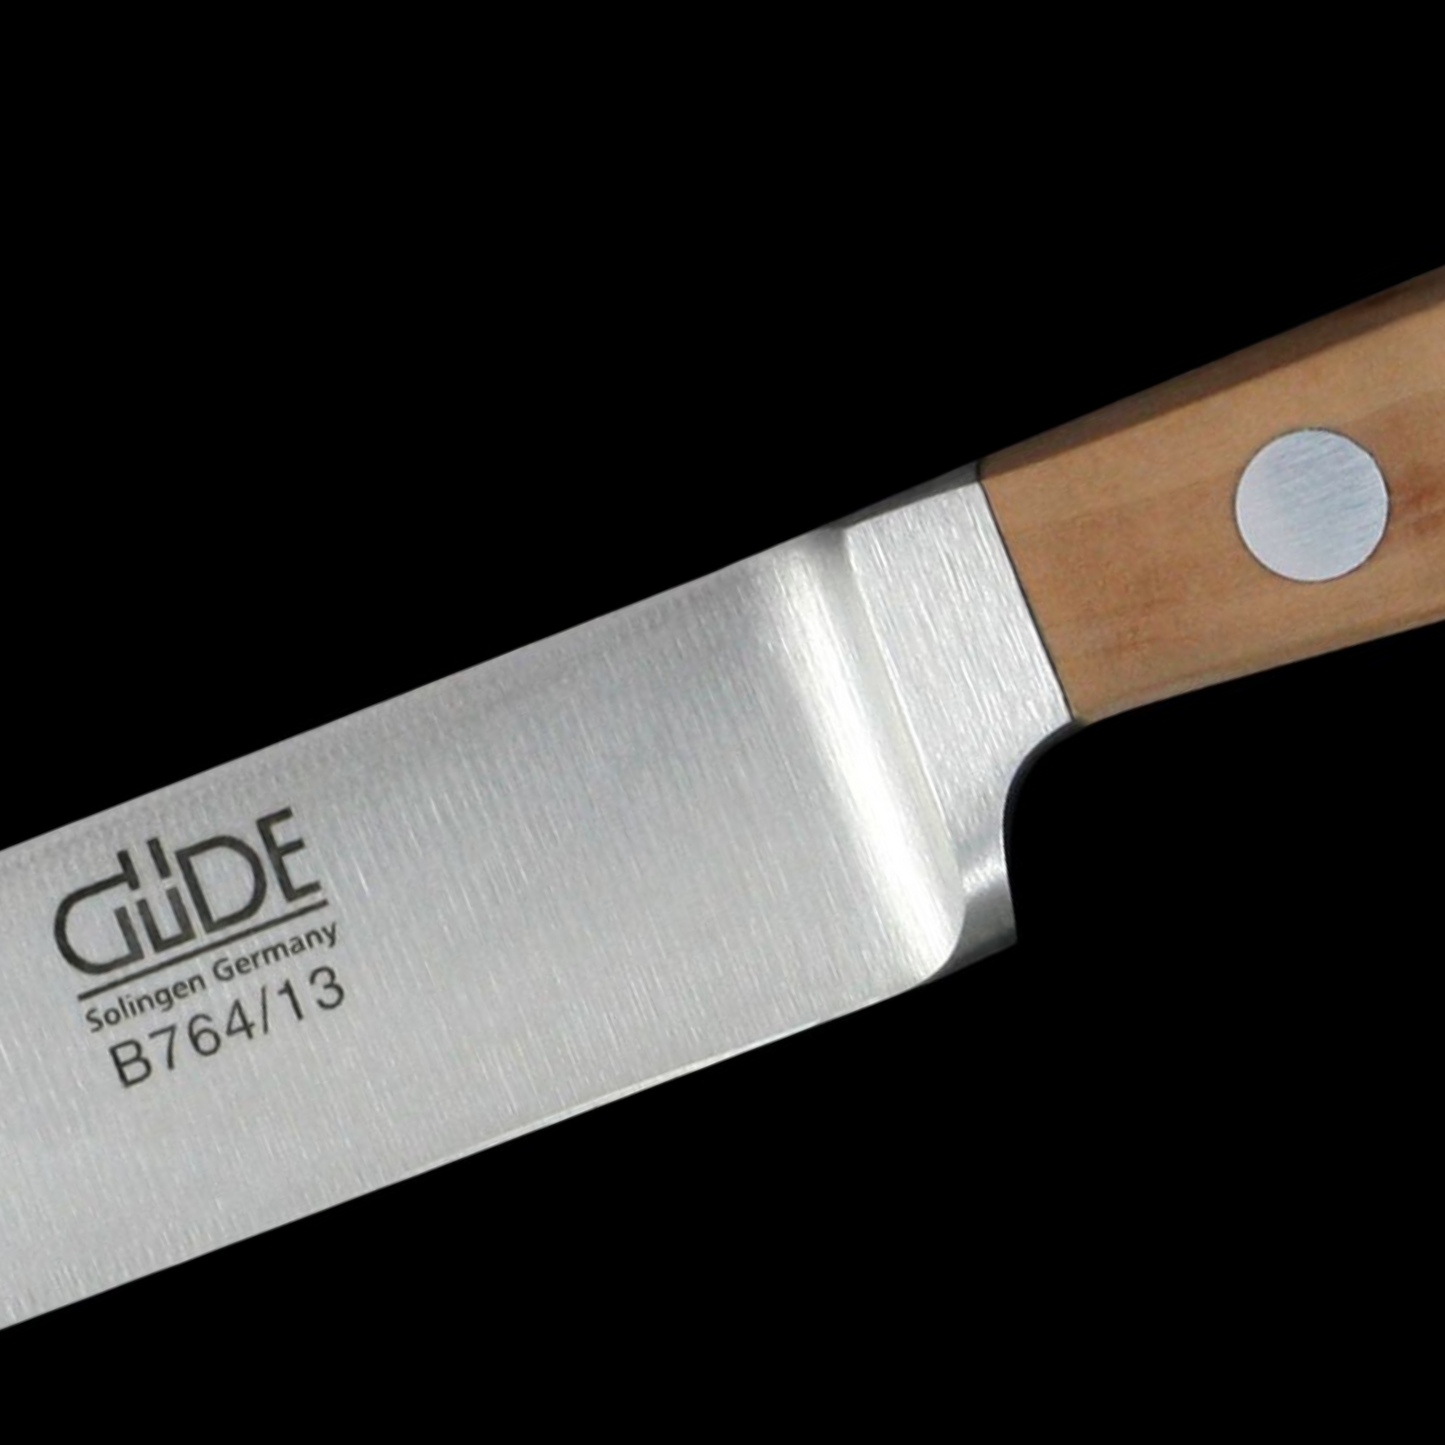 Gude Alpha Birne Series Forged Double Bolster Paring Knife 5", Pearwood Handle - GuedeUSA